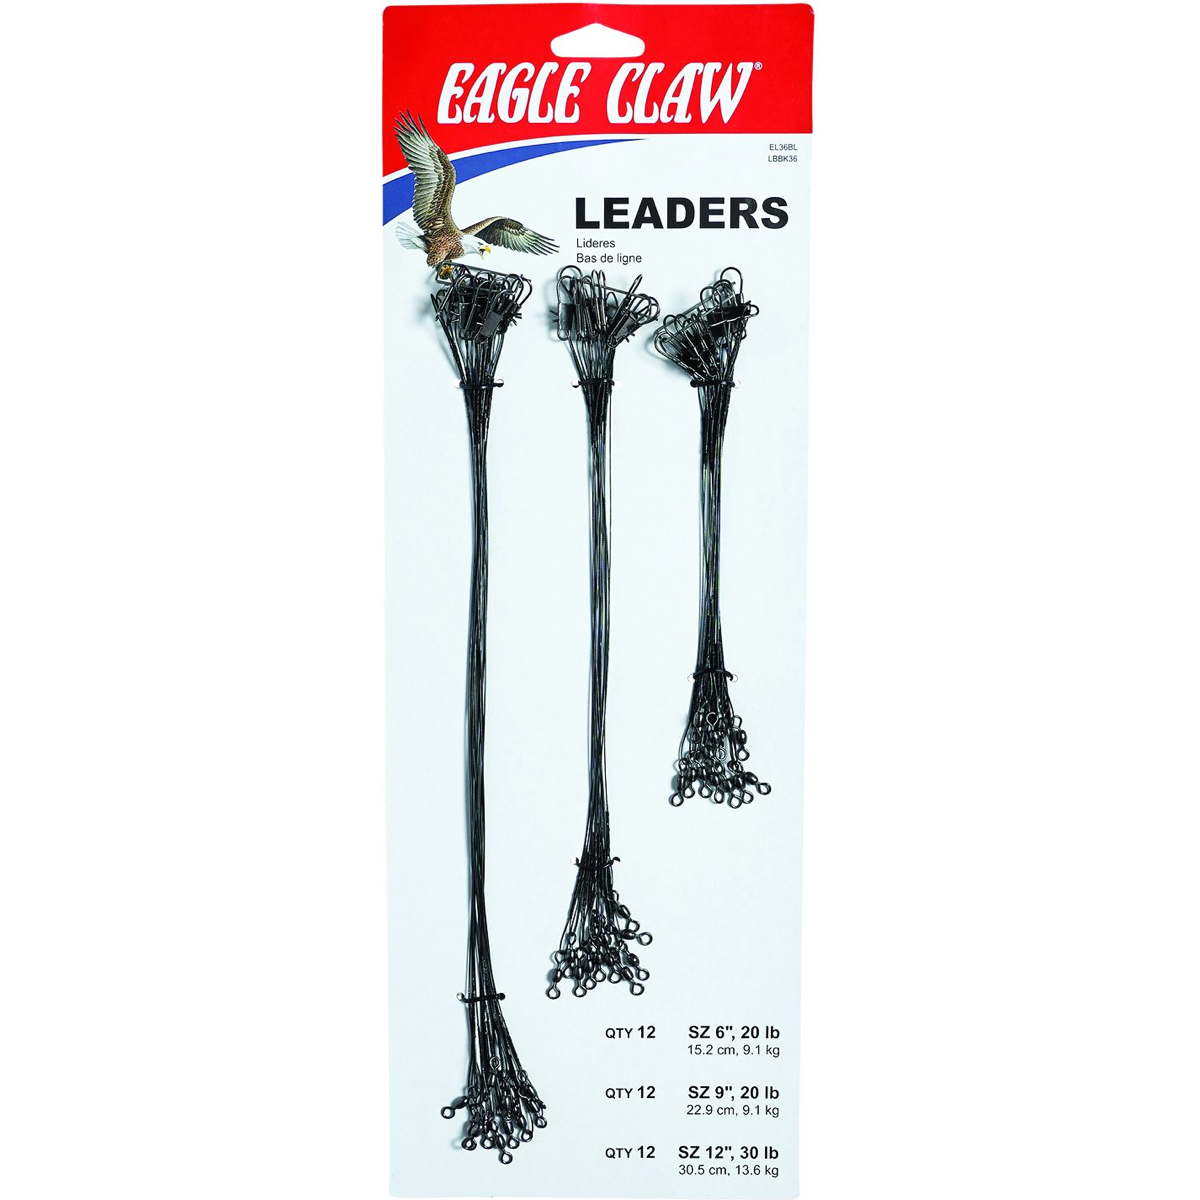 Photo of Eagle Claw Assorted Wire Leader Board for sale at United Tackle Shops.